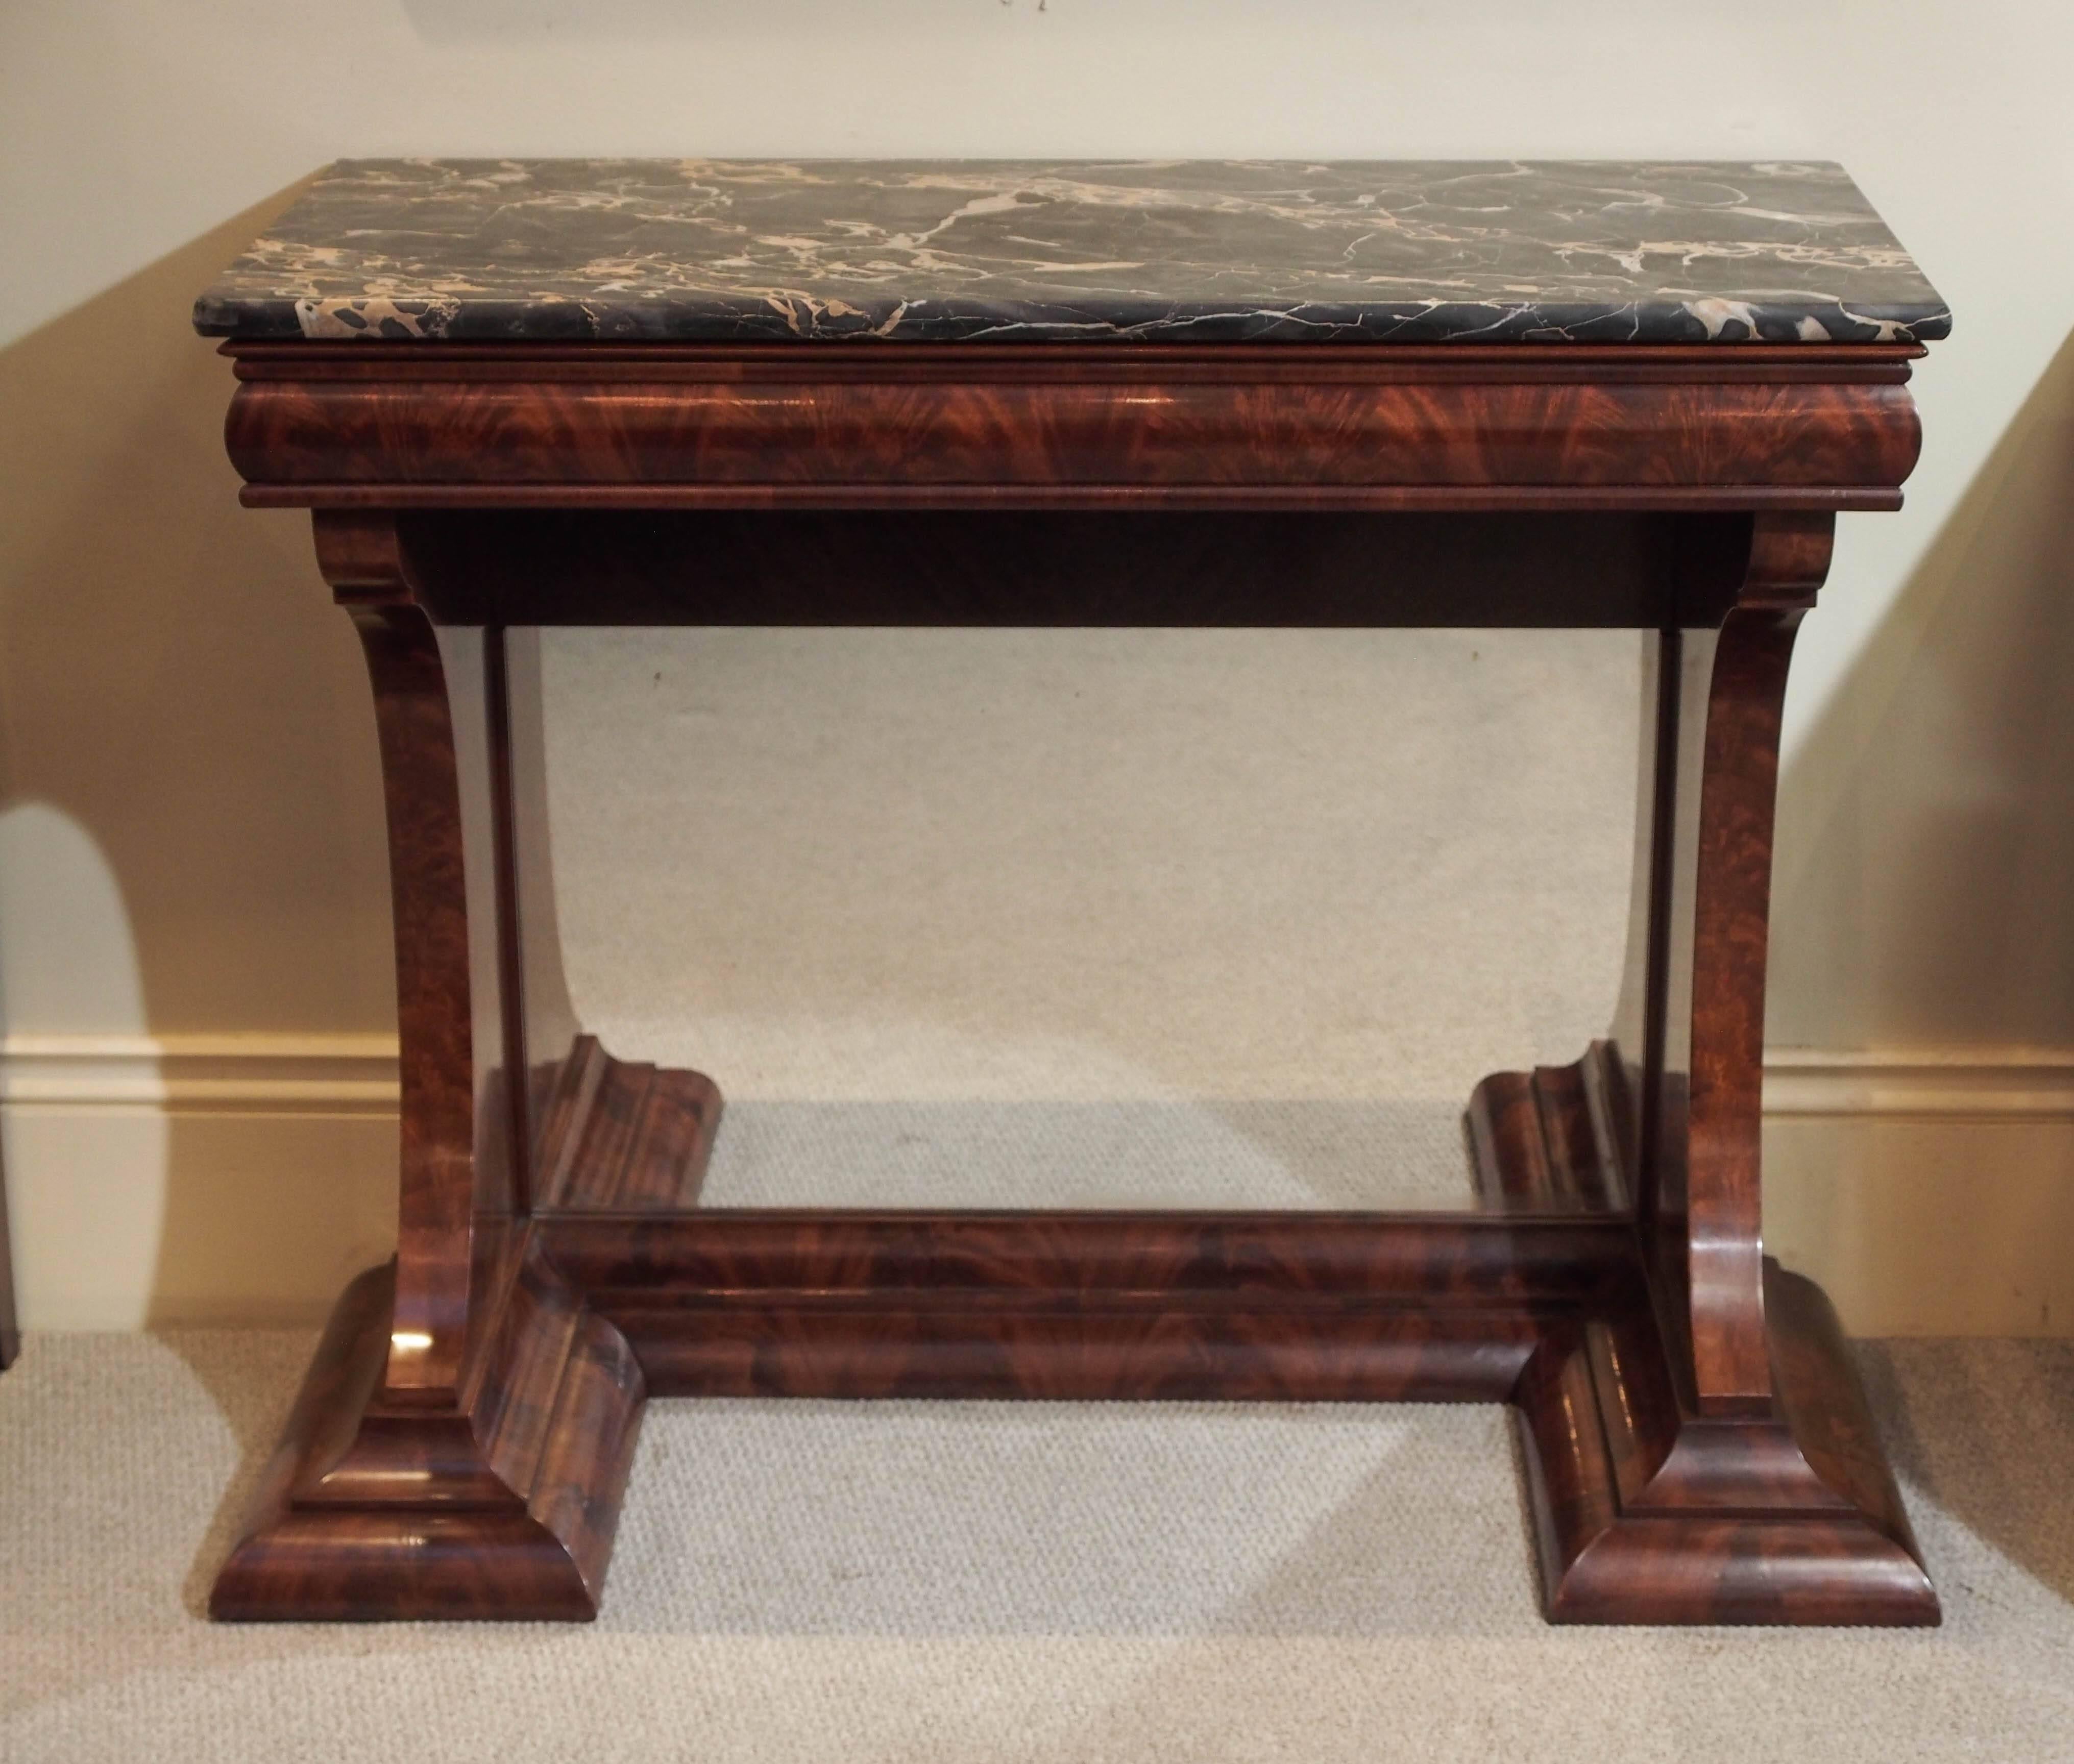 Antique American mahogany pier table with marble top and 